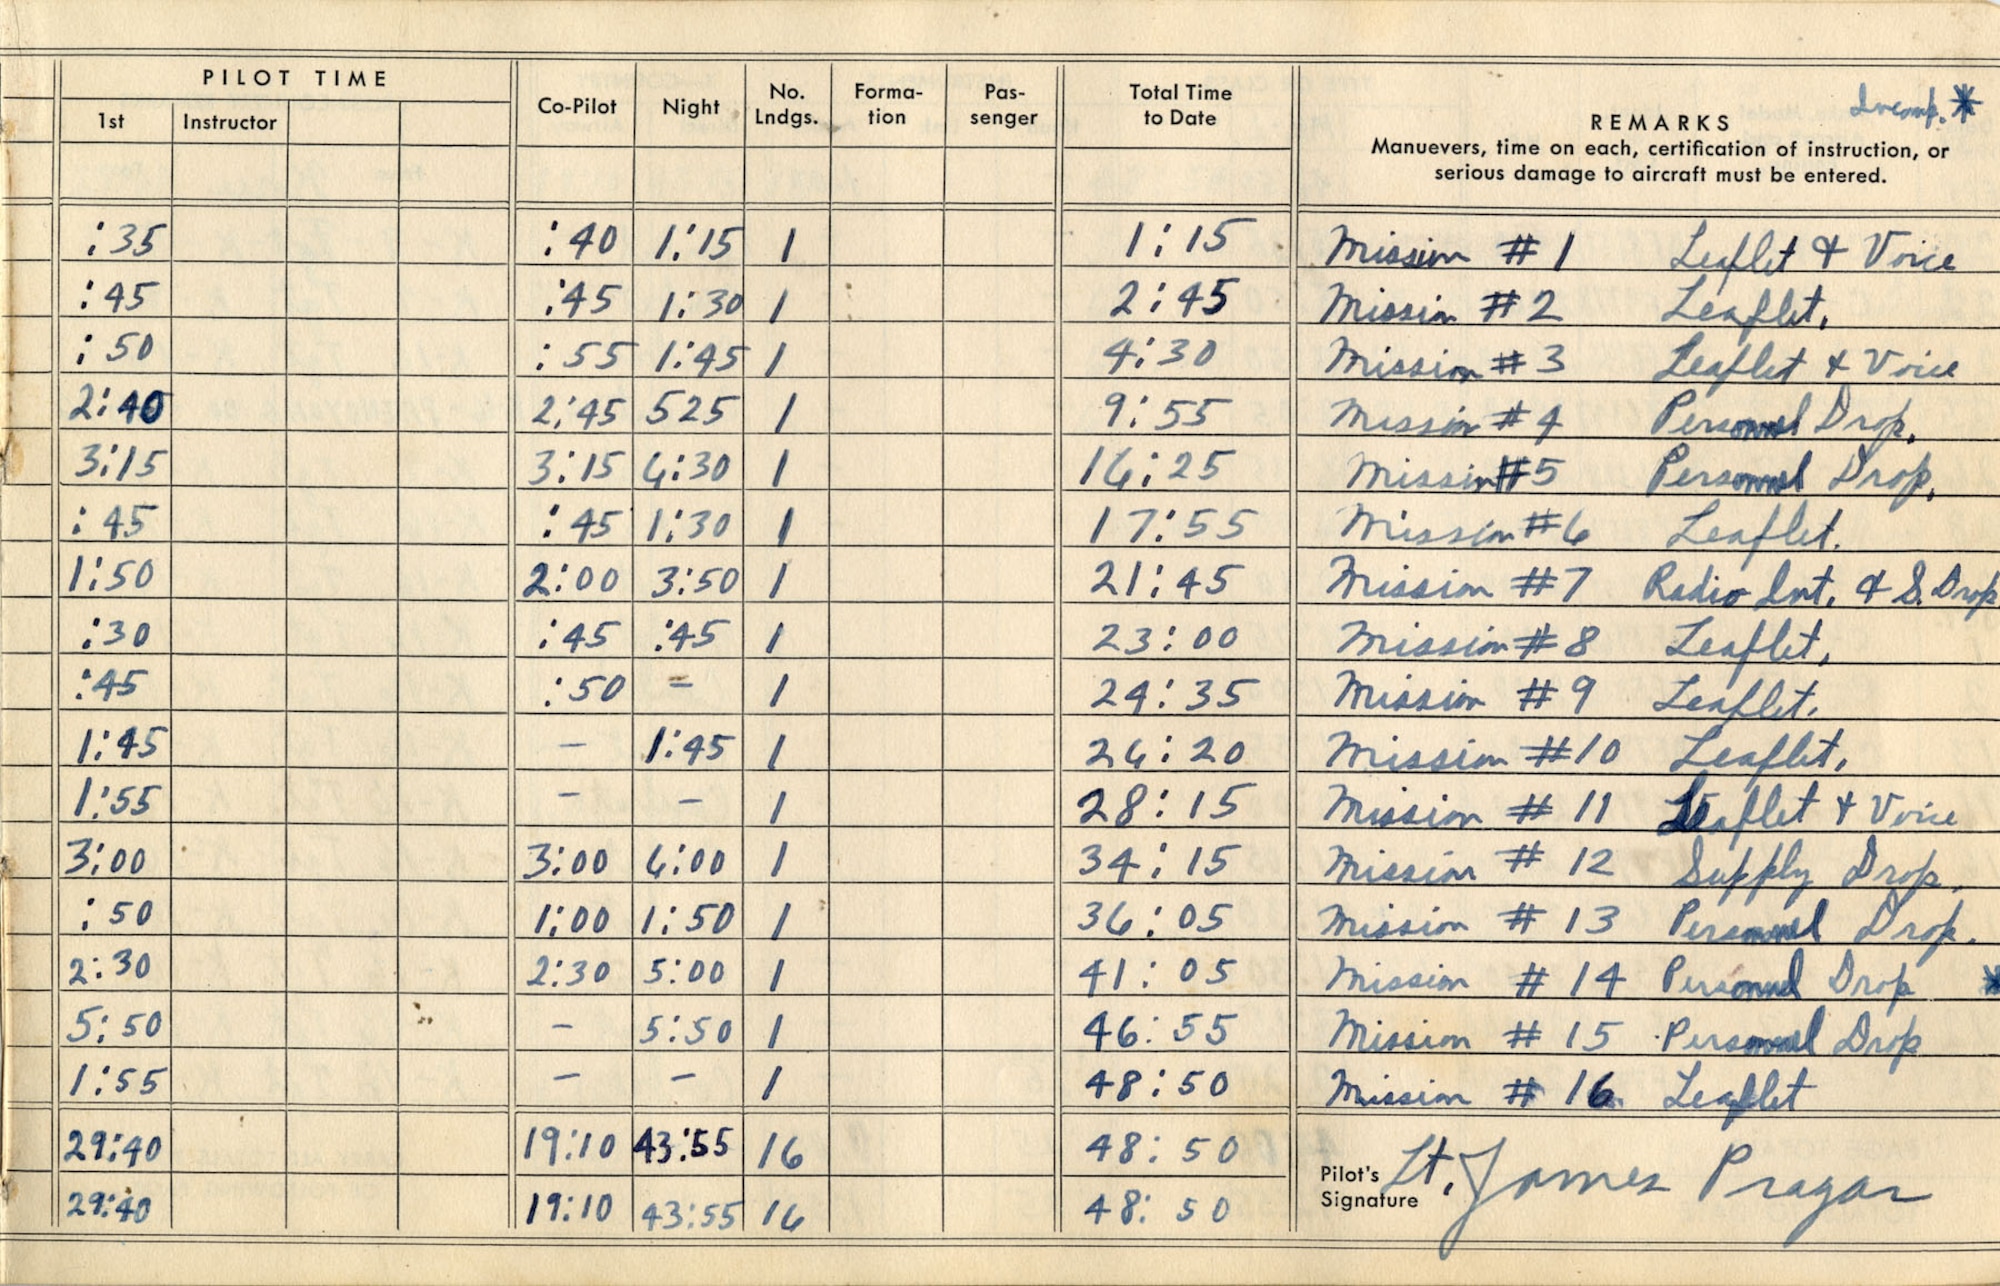 The first pages from 1st Lt. James Pragar’s combat flight log. The dates include his six-hour Distinguished Flying Cross mission on Sept. 12, 1951. The far right column lists the purpose of each mission. (U.S. Air Force photo)